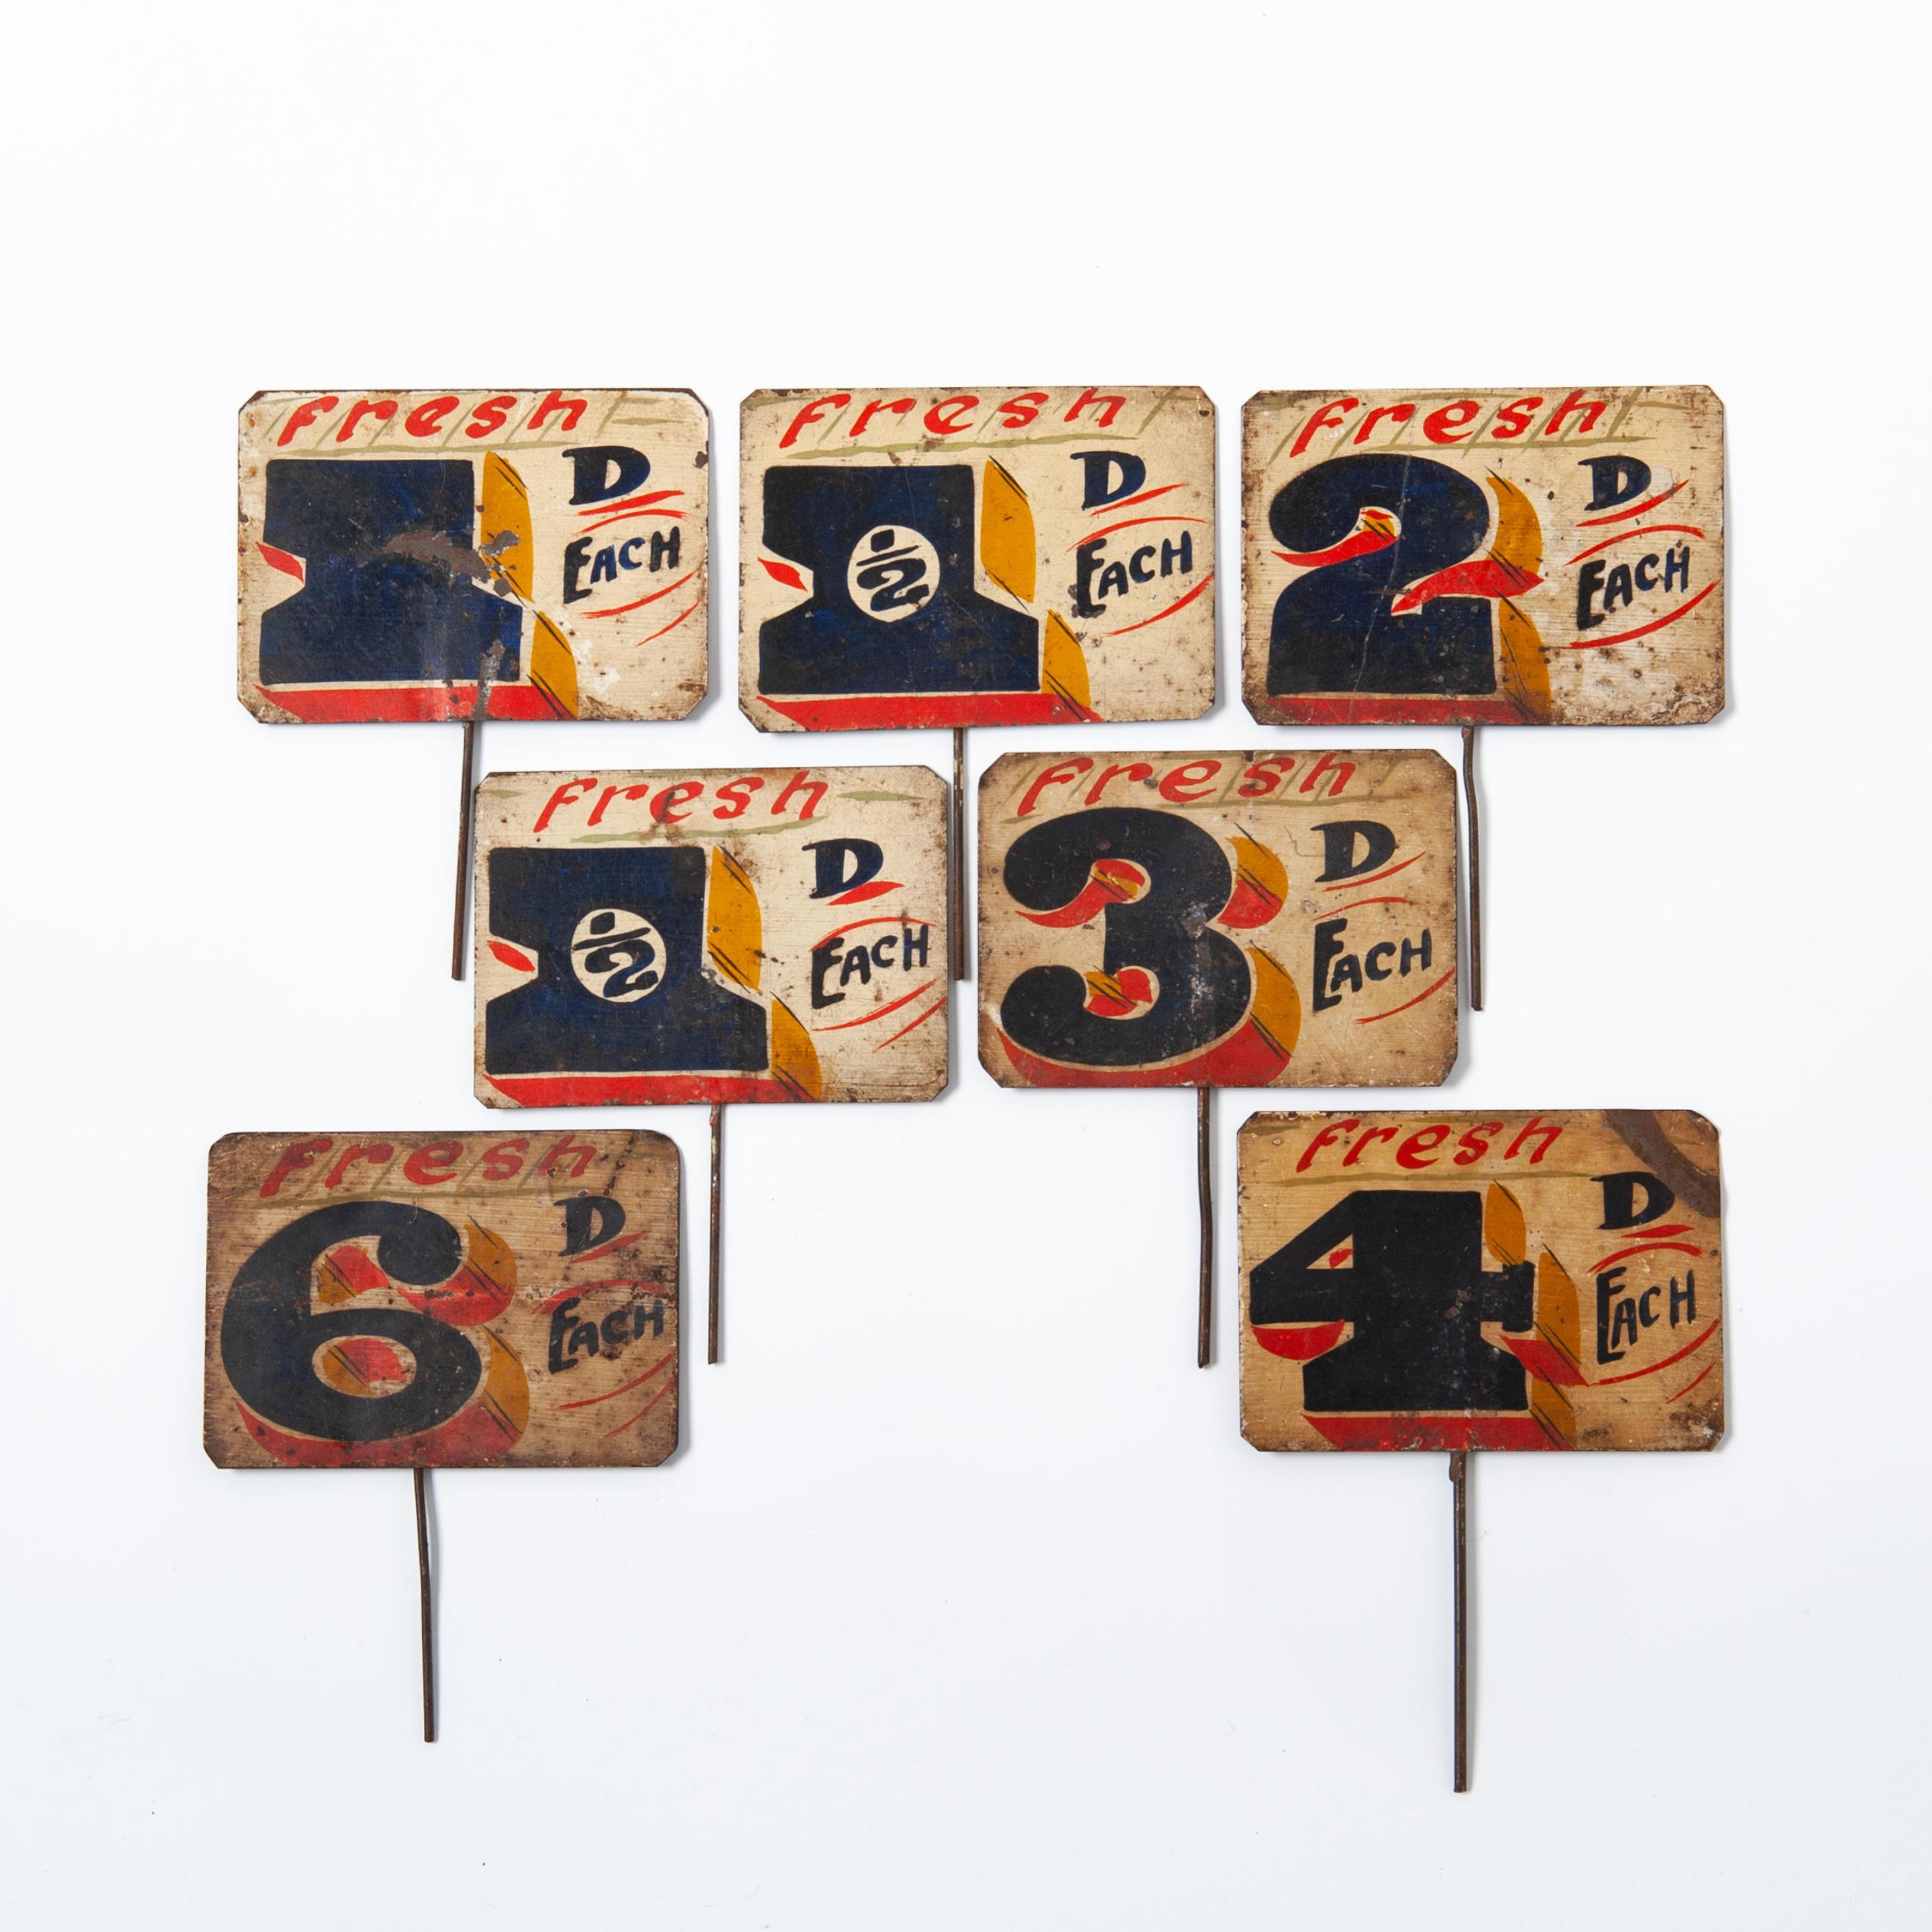 7 Tole Painted Grocers Signs.
England, circa 1900.
Overall height including pins 15cm.